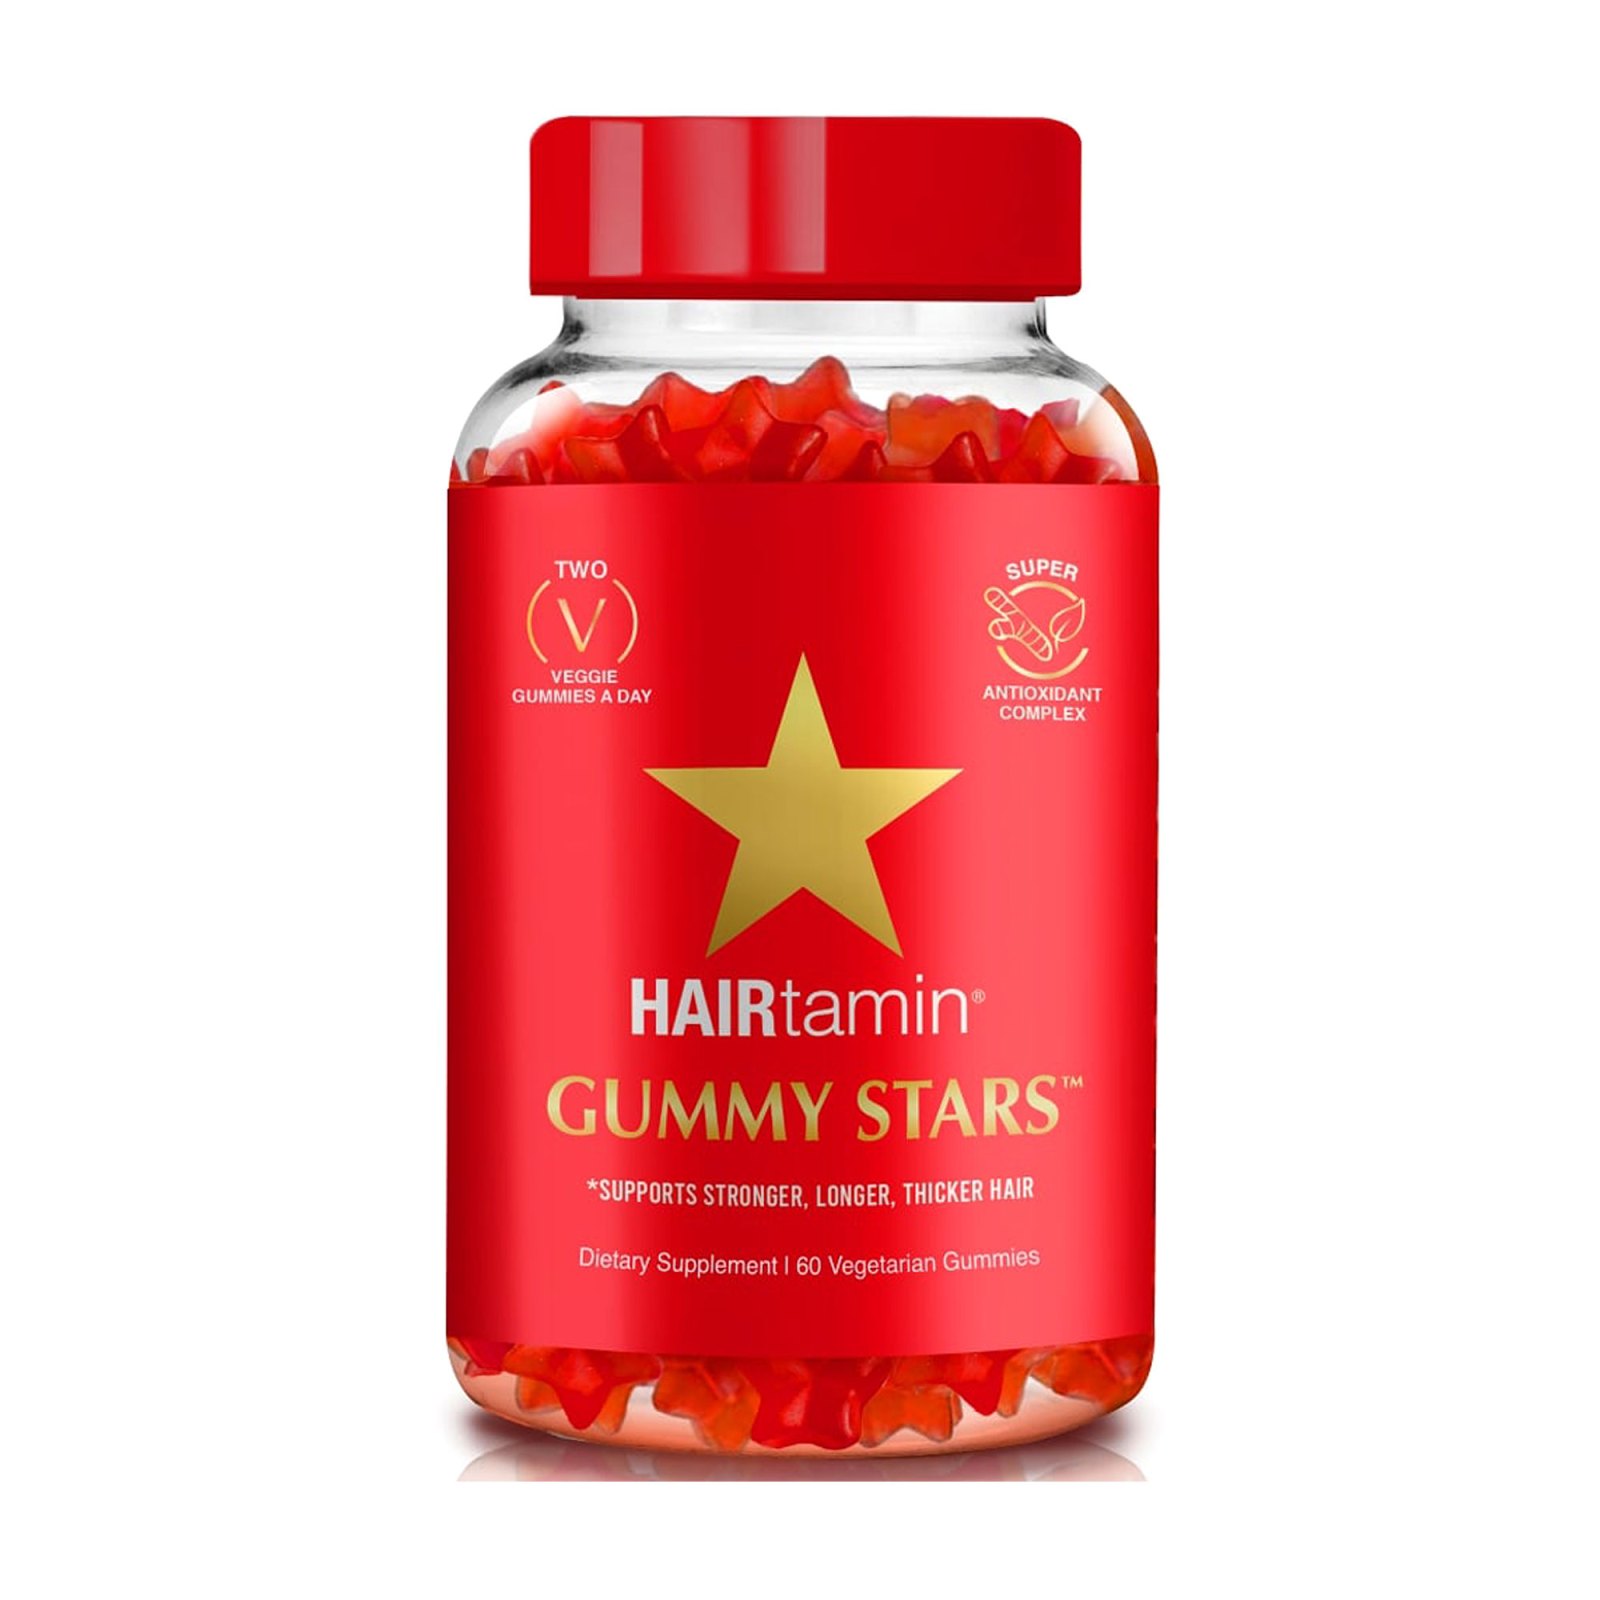 HAIRtamin Gummy Stars Buzzzz-o-Meter Hollywood Is Buzzing About This Week